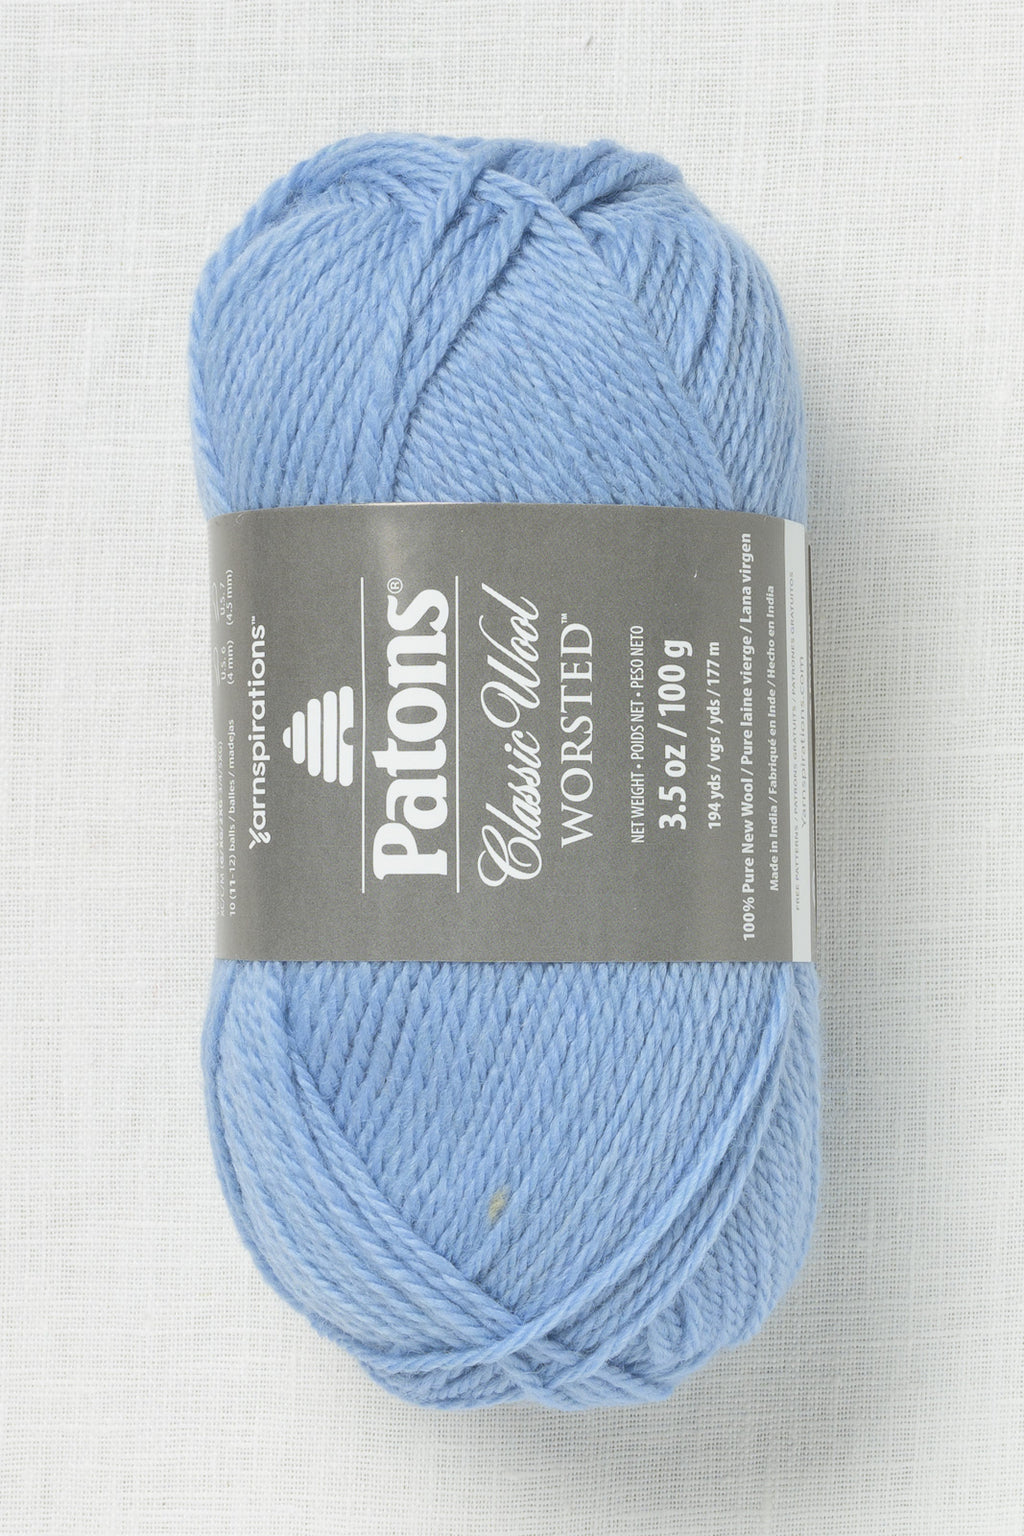 Patons Classic Wool Worsted Blue Fog